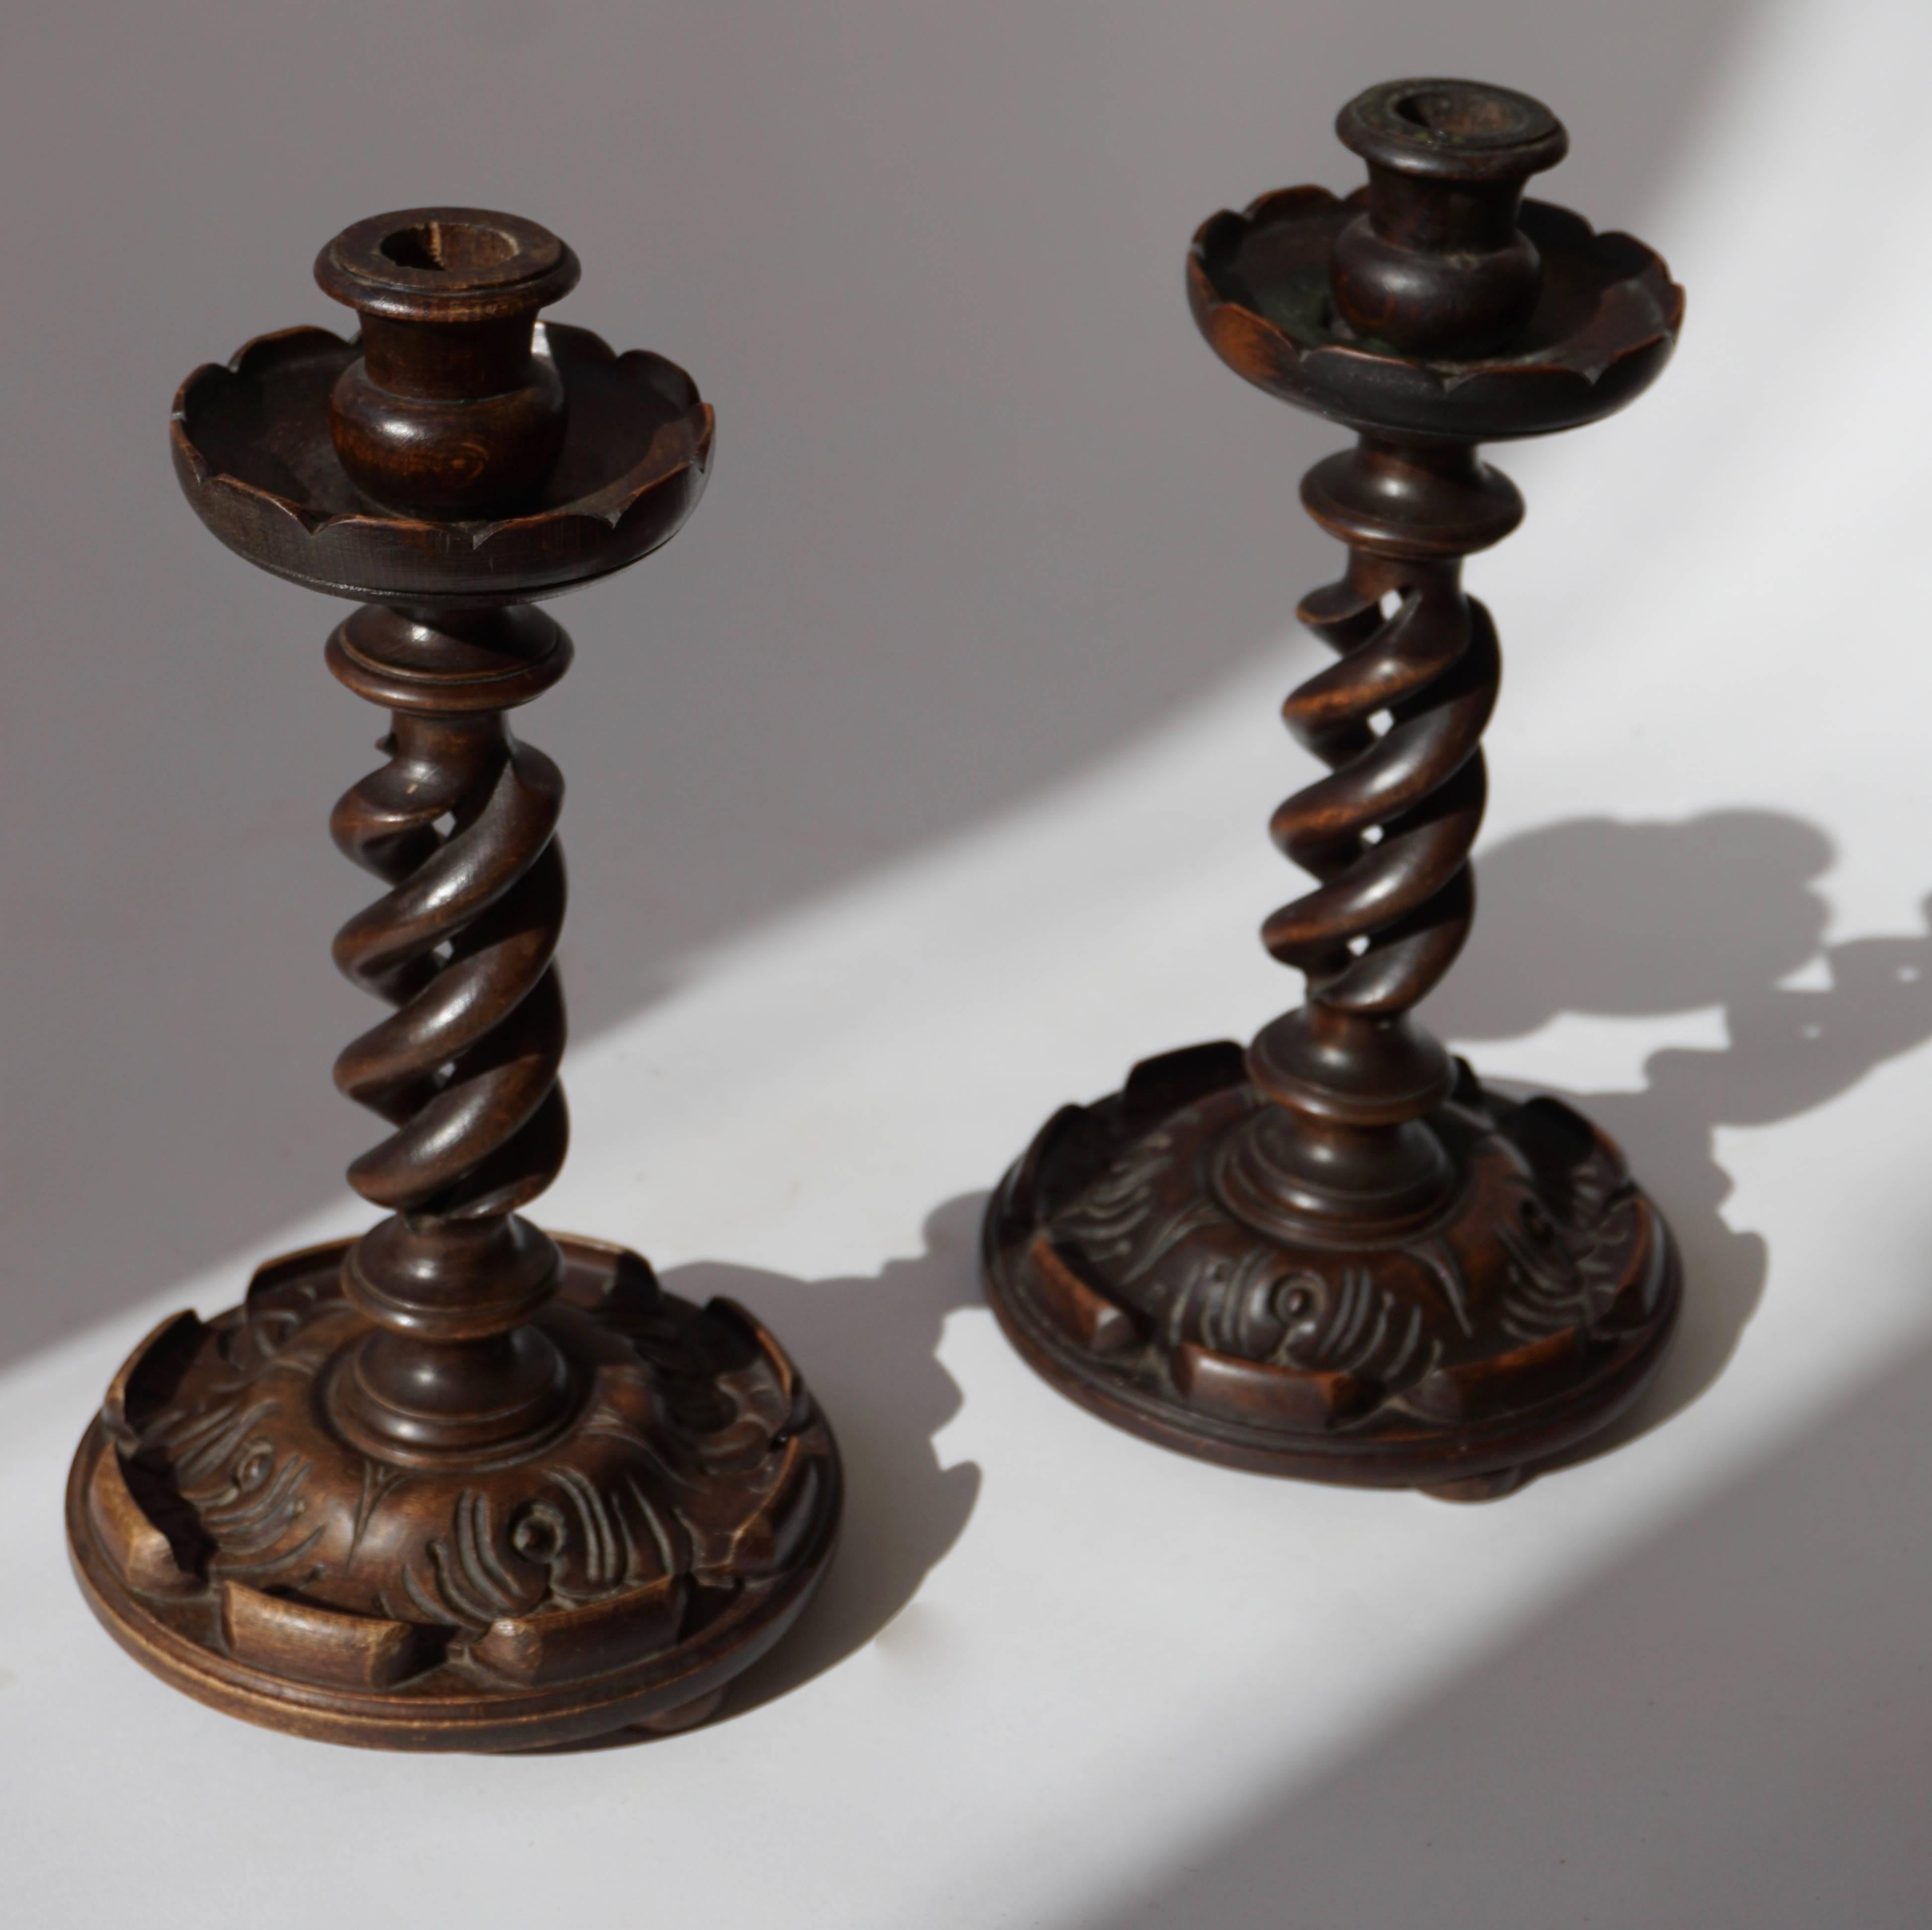 Two twisted wooden candlesticks.
Measures: Diameter 16 cm.
Height 29 cm.